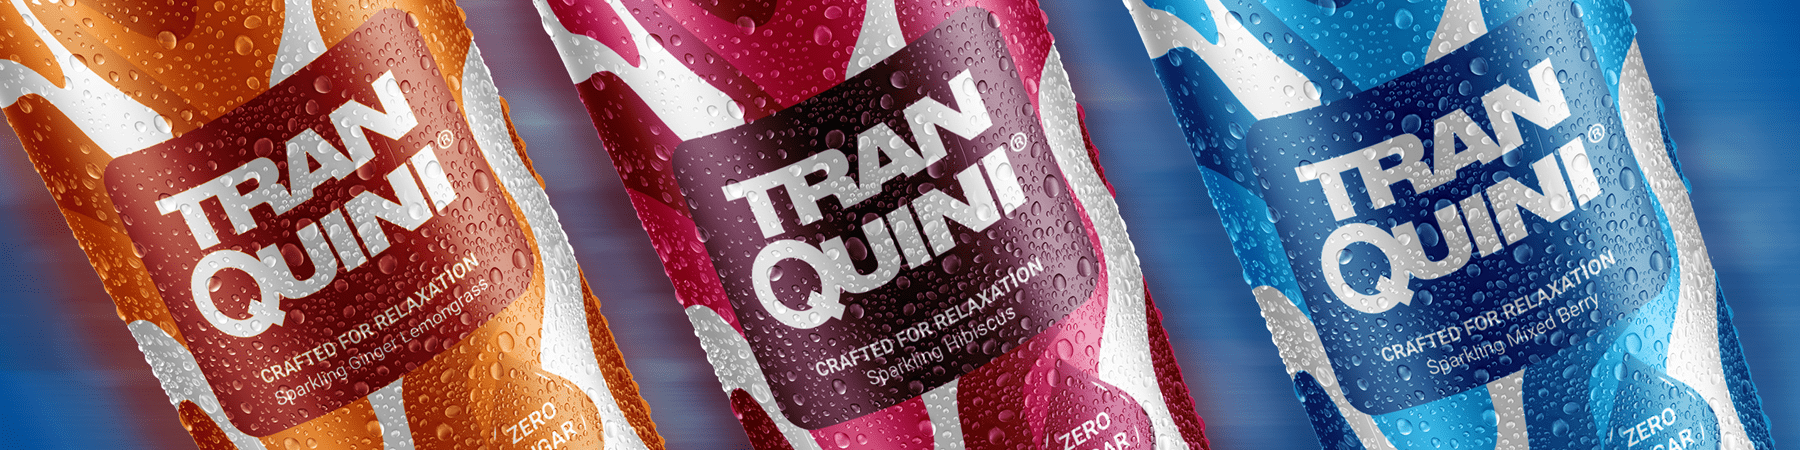 Image showing a Tranquini Variety Pack of beverage cans. The cans, from left to right, are orange, red, and blue with droplets of condensation suggesting they are cold. All cans have "Crafted for Relaxation Sparkling Tonic" written on the label.